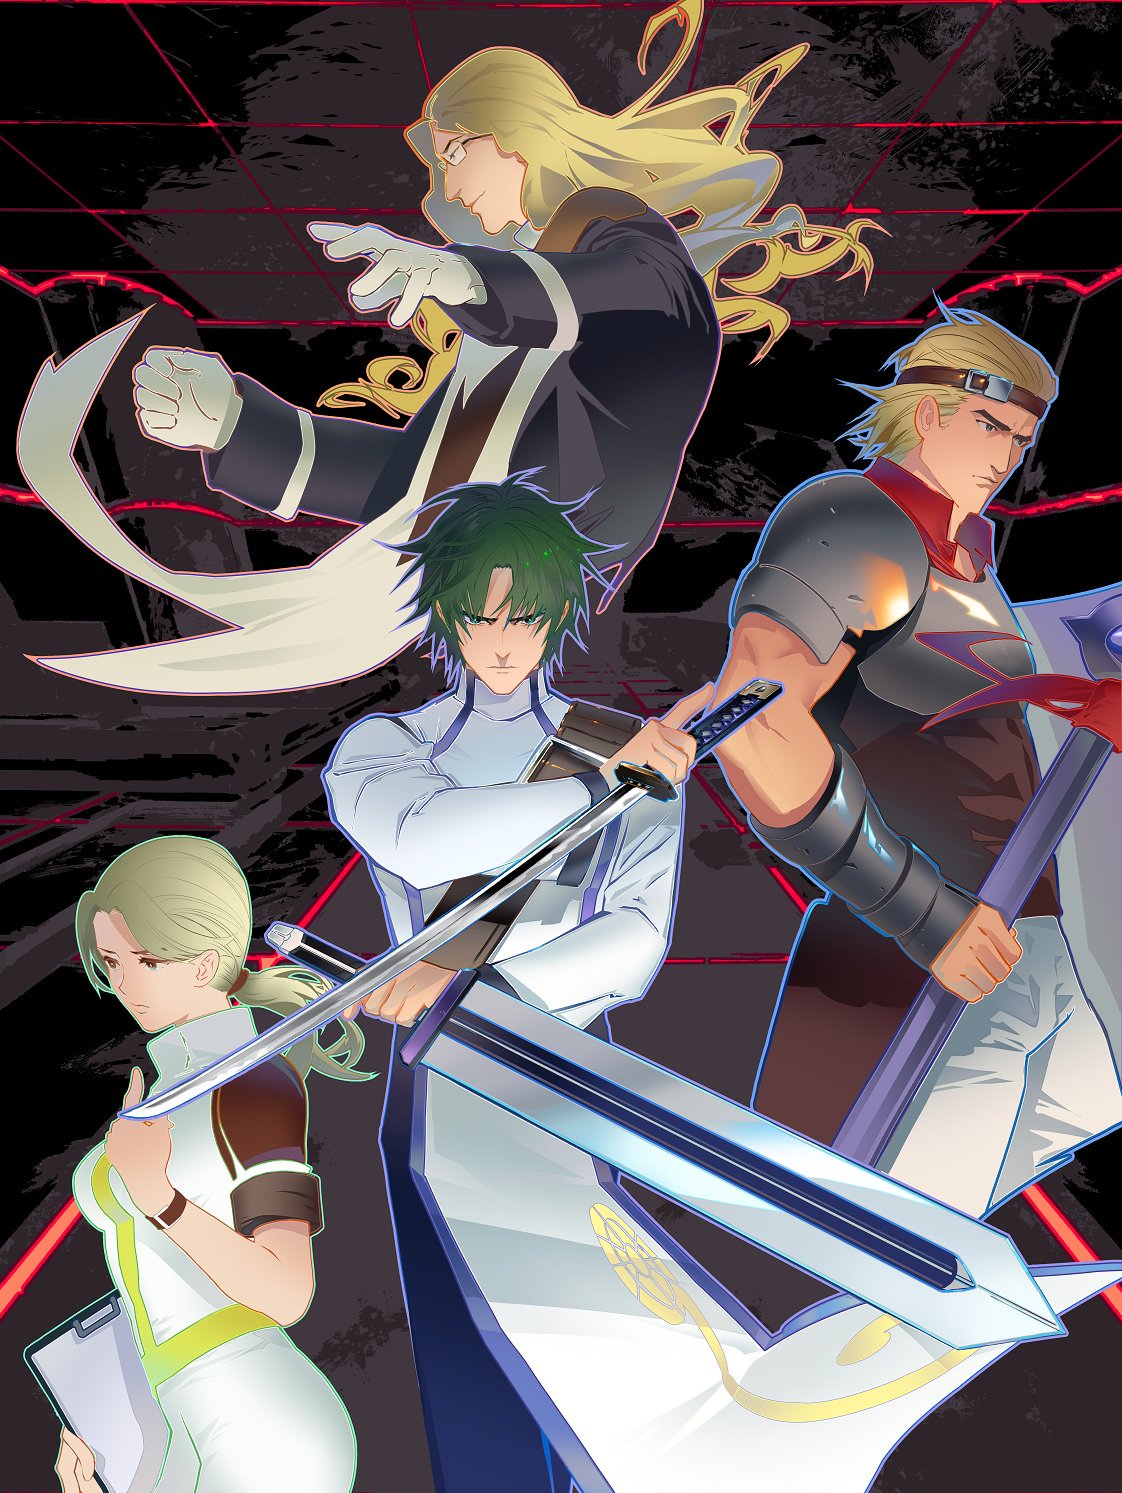 3boys arc_the_lad arc_the_lad_iii armor blonde_hair breasts clipboard closed_mouth dress glasses gloves green_hair headband highres holding long_hair looking_at_viewer multiple_boys save_scene_a seville_(arc_the_lad) sharon_(arc_the_lad) sword weapon